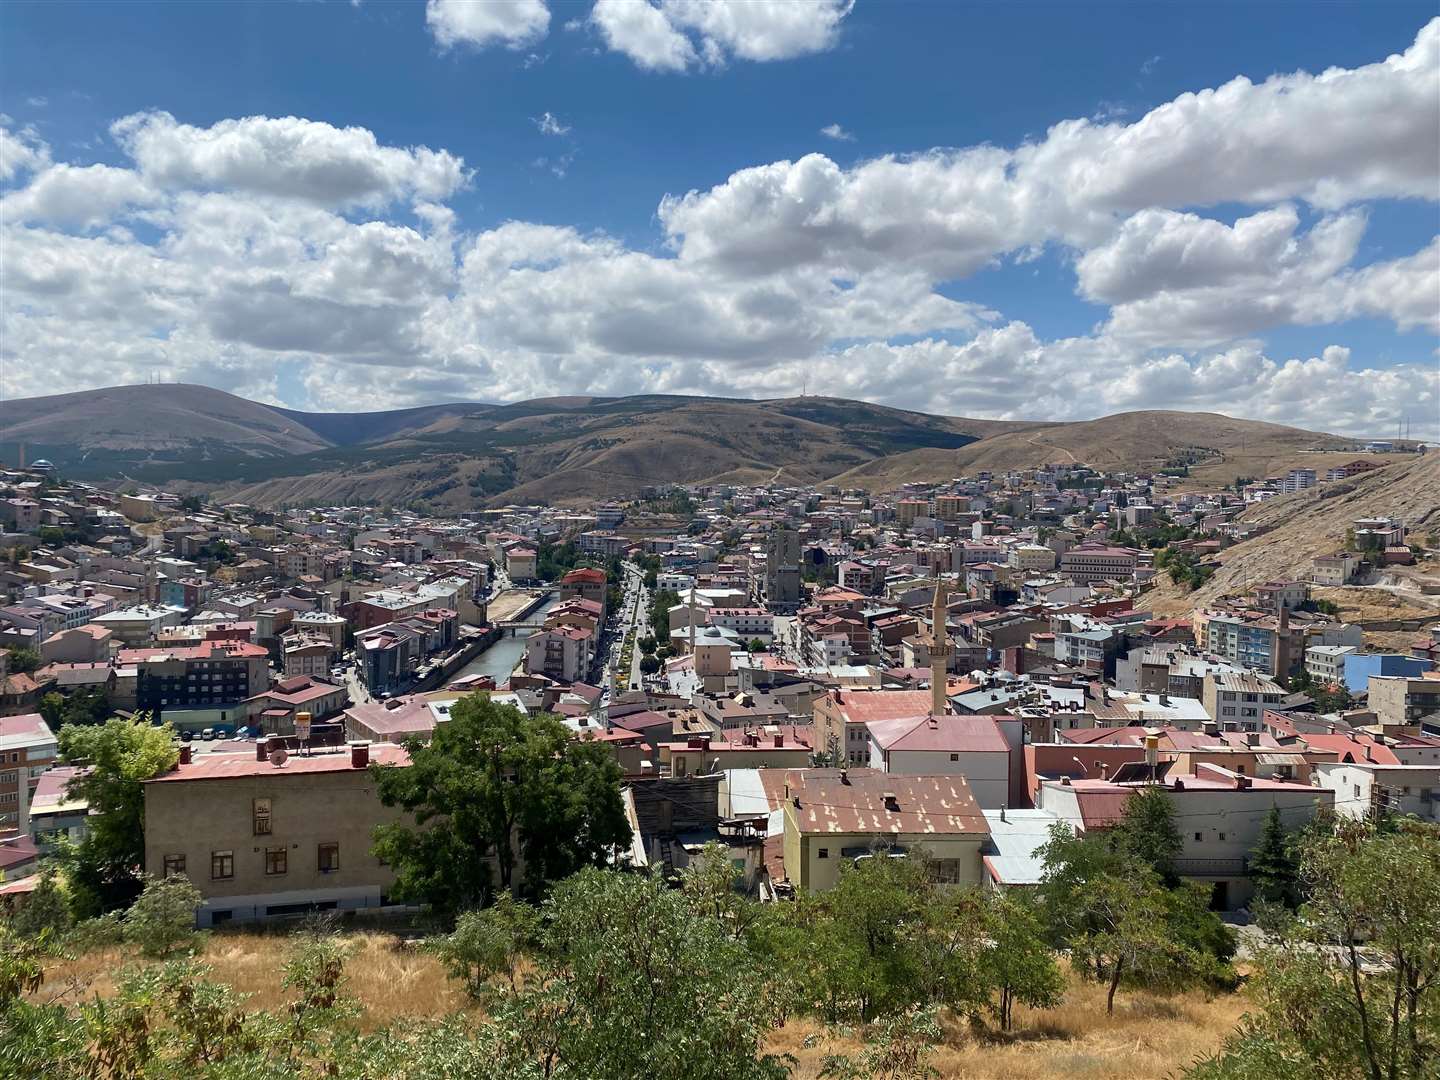 Bayburt is a bustling city a few minutes away from the tranquility of the mountains